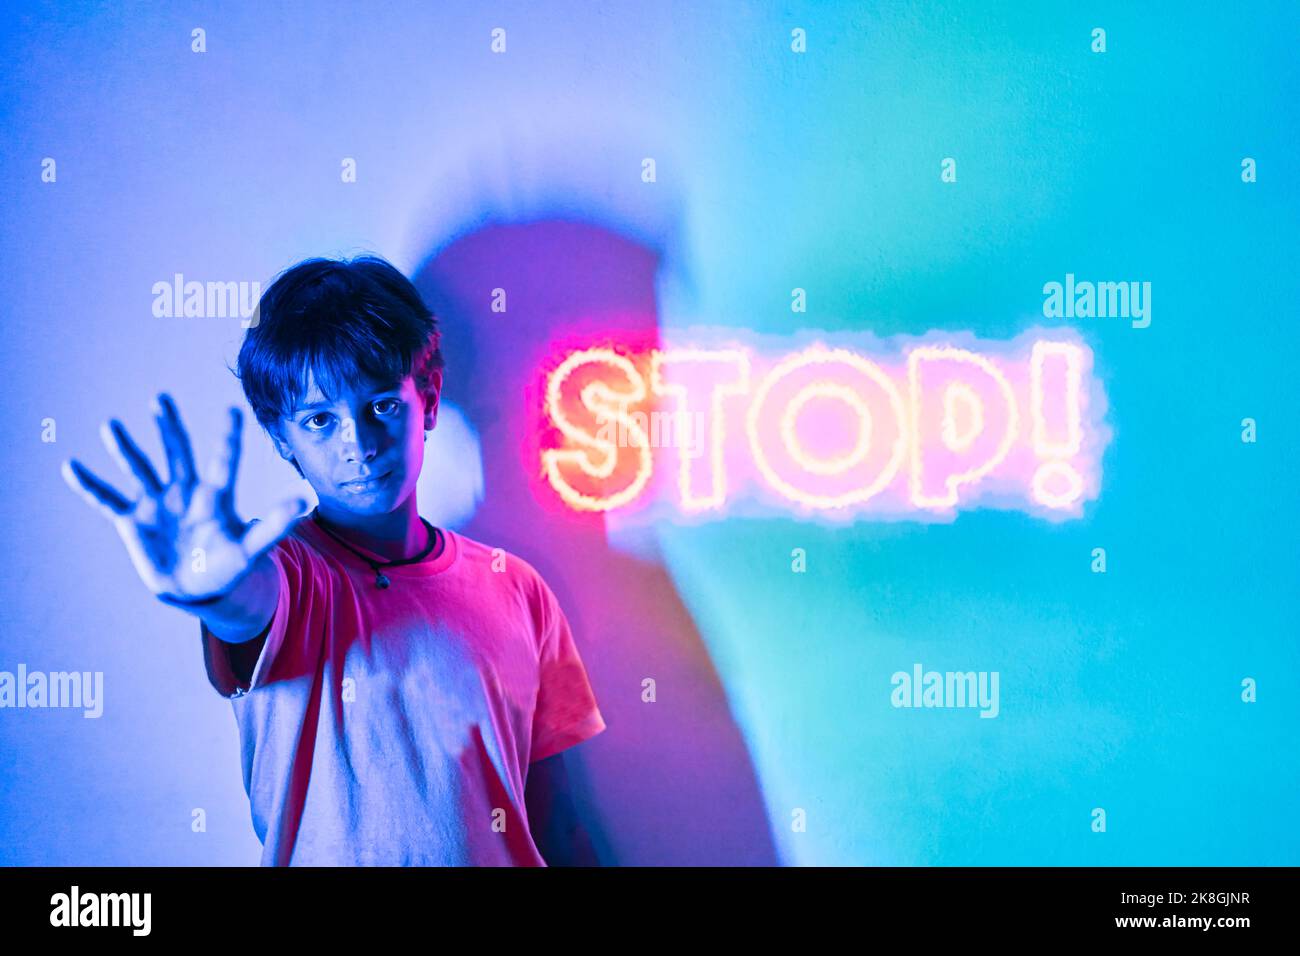 Determined preteen kid in t shirt standing in room with blue illumination and showing no gesture near orange neon stop inscription Stock Photo